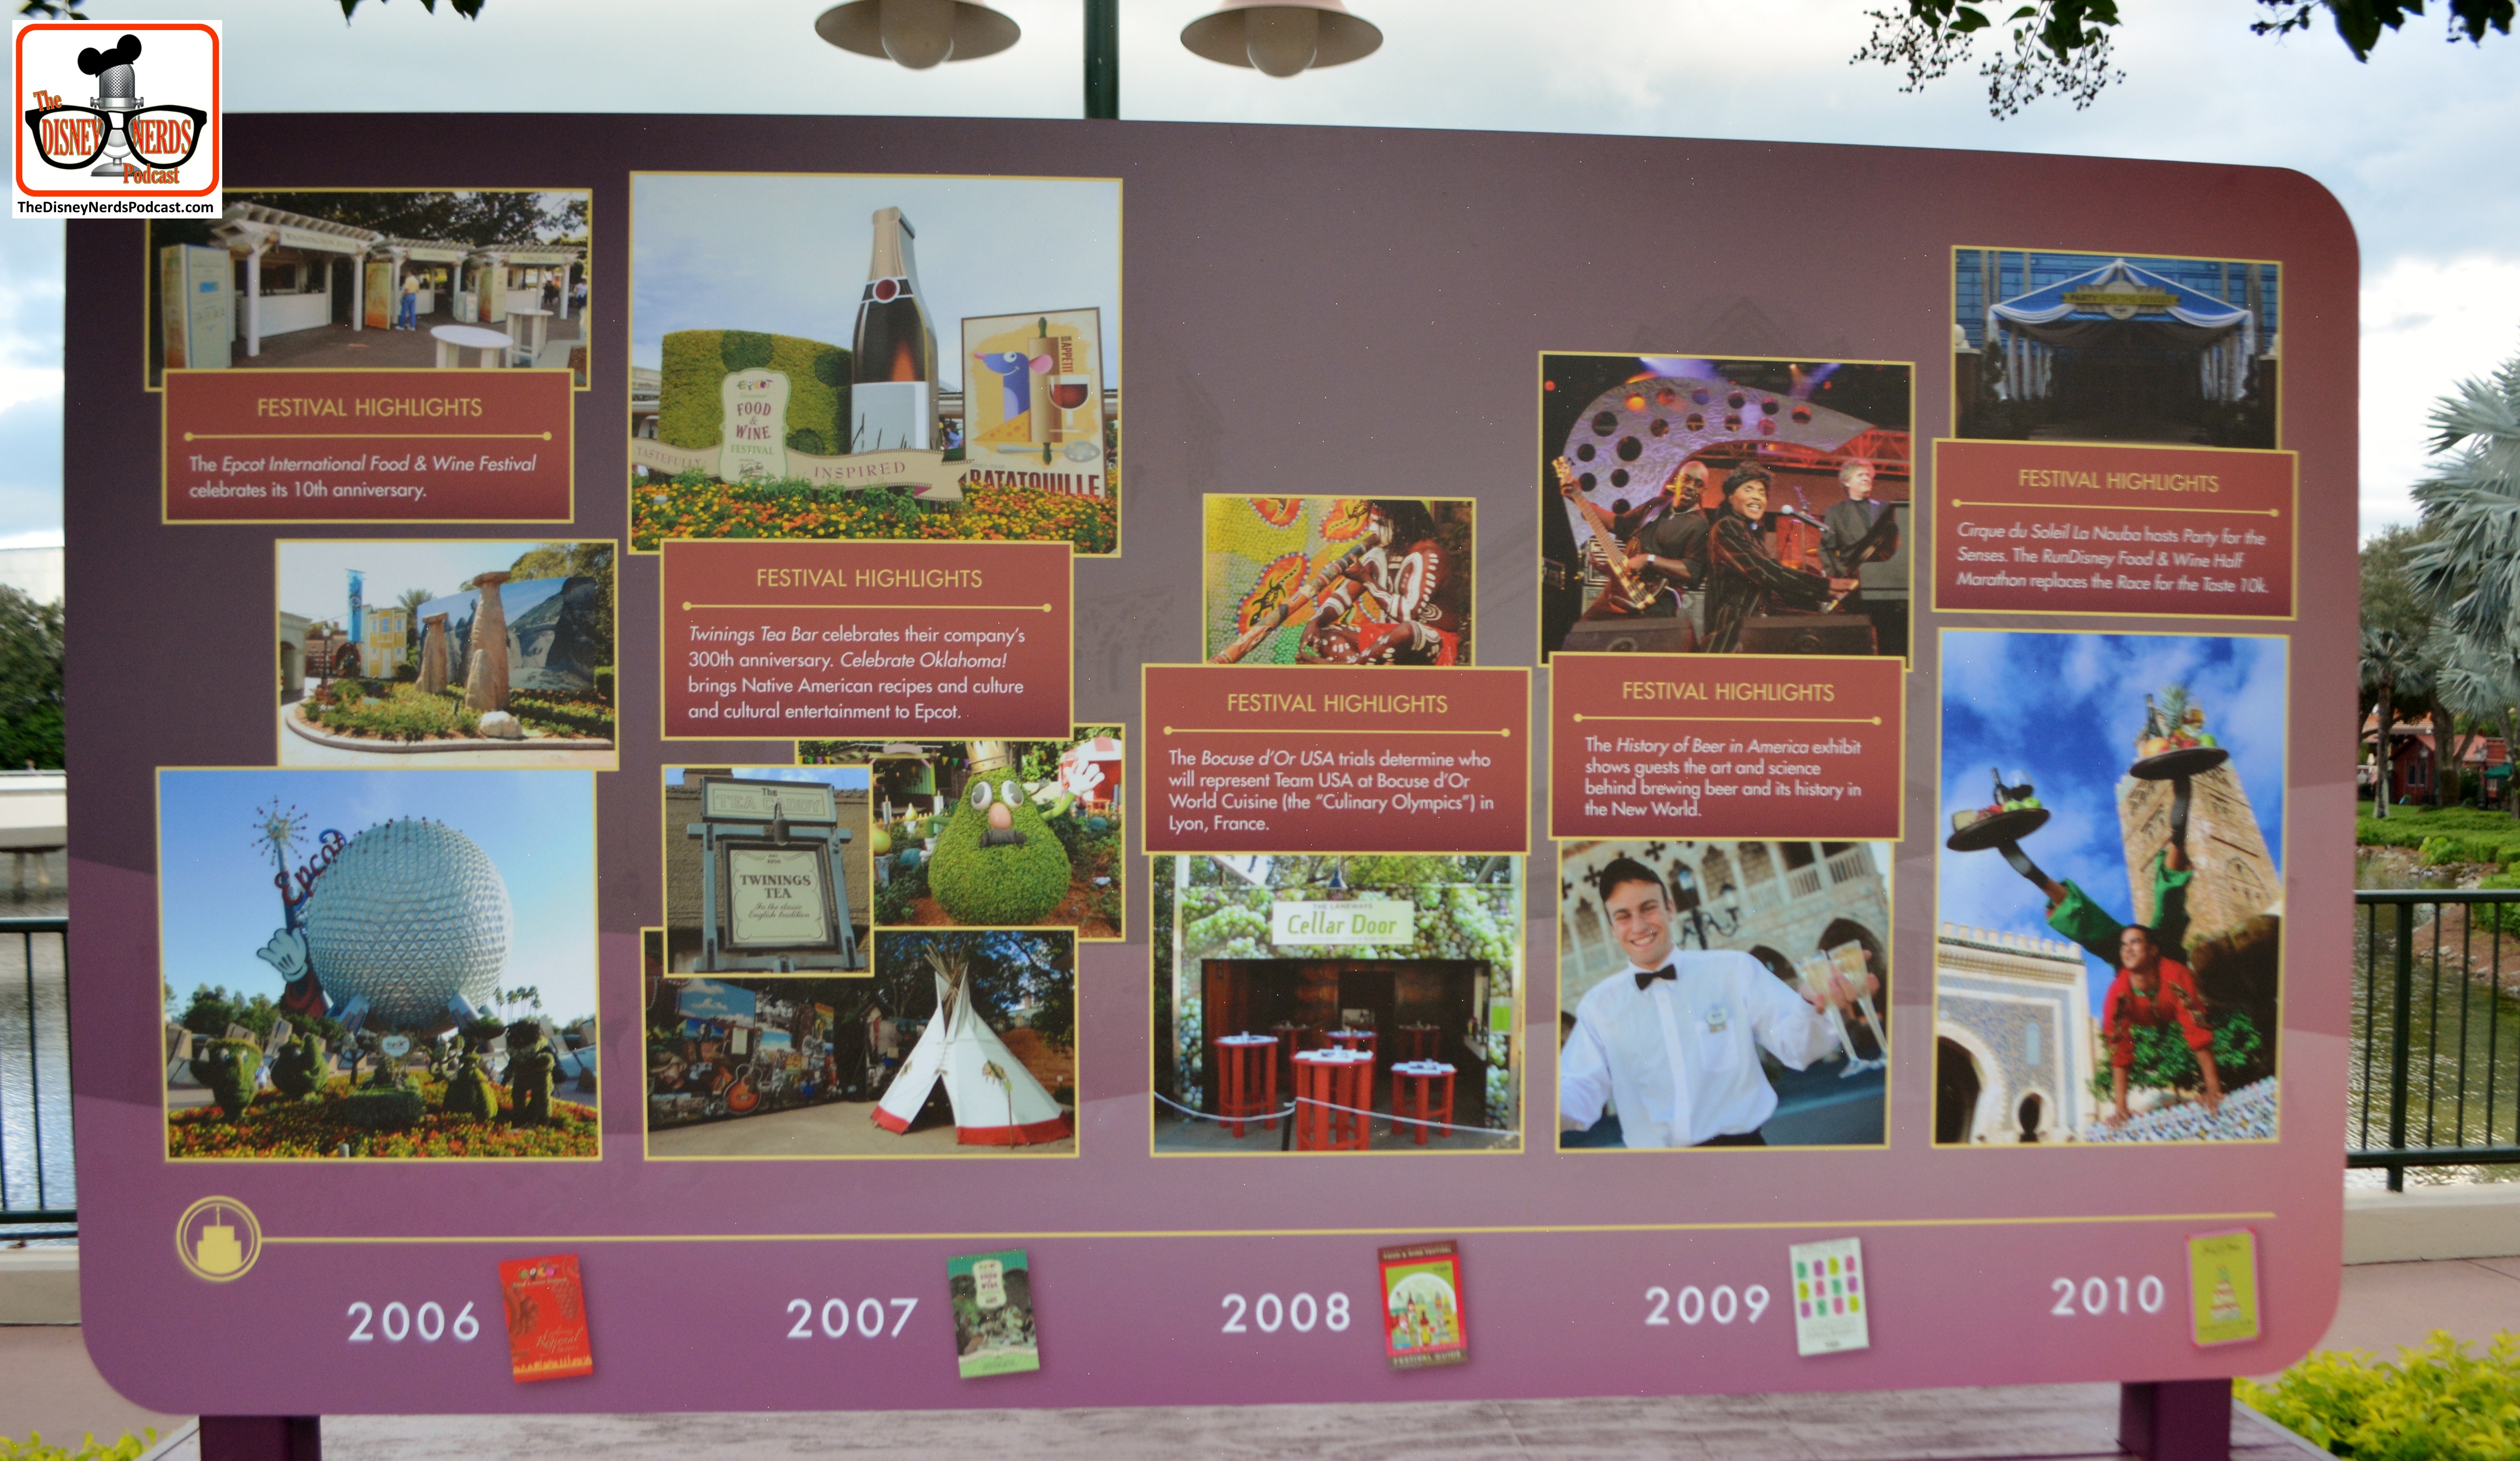 The 20 year History of the Food and Wine Festival was documented on the walkway between future world and world showcase..